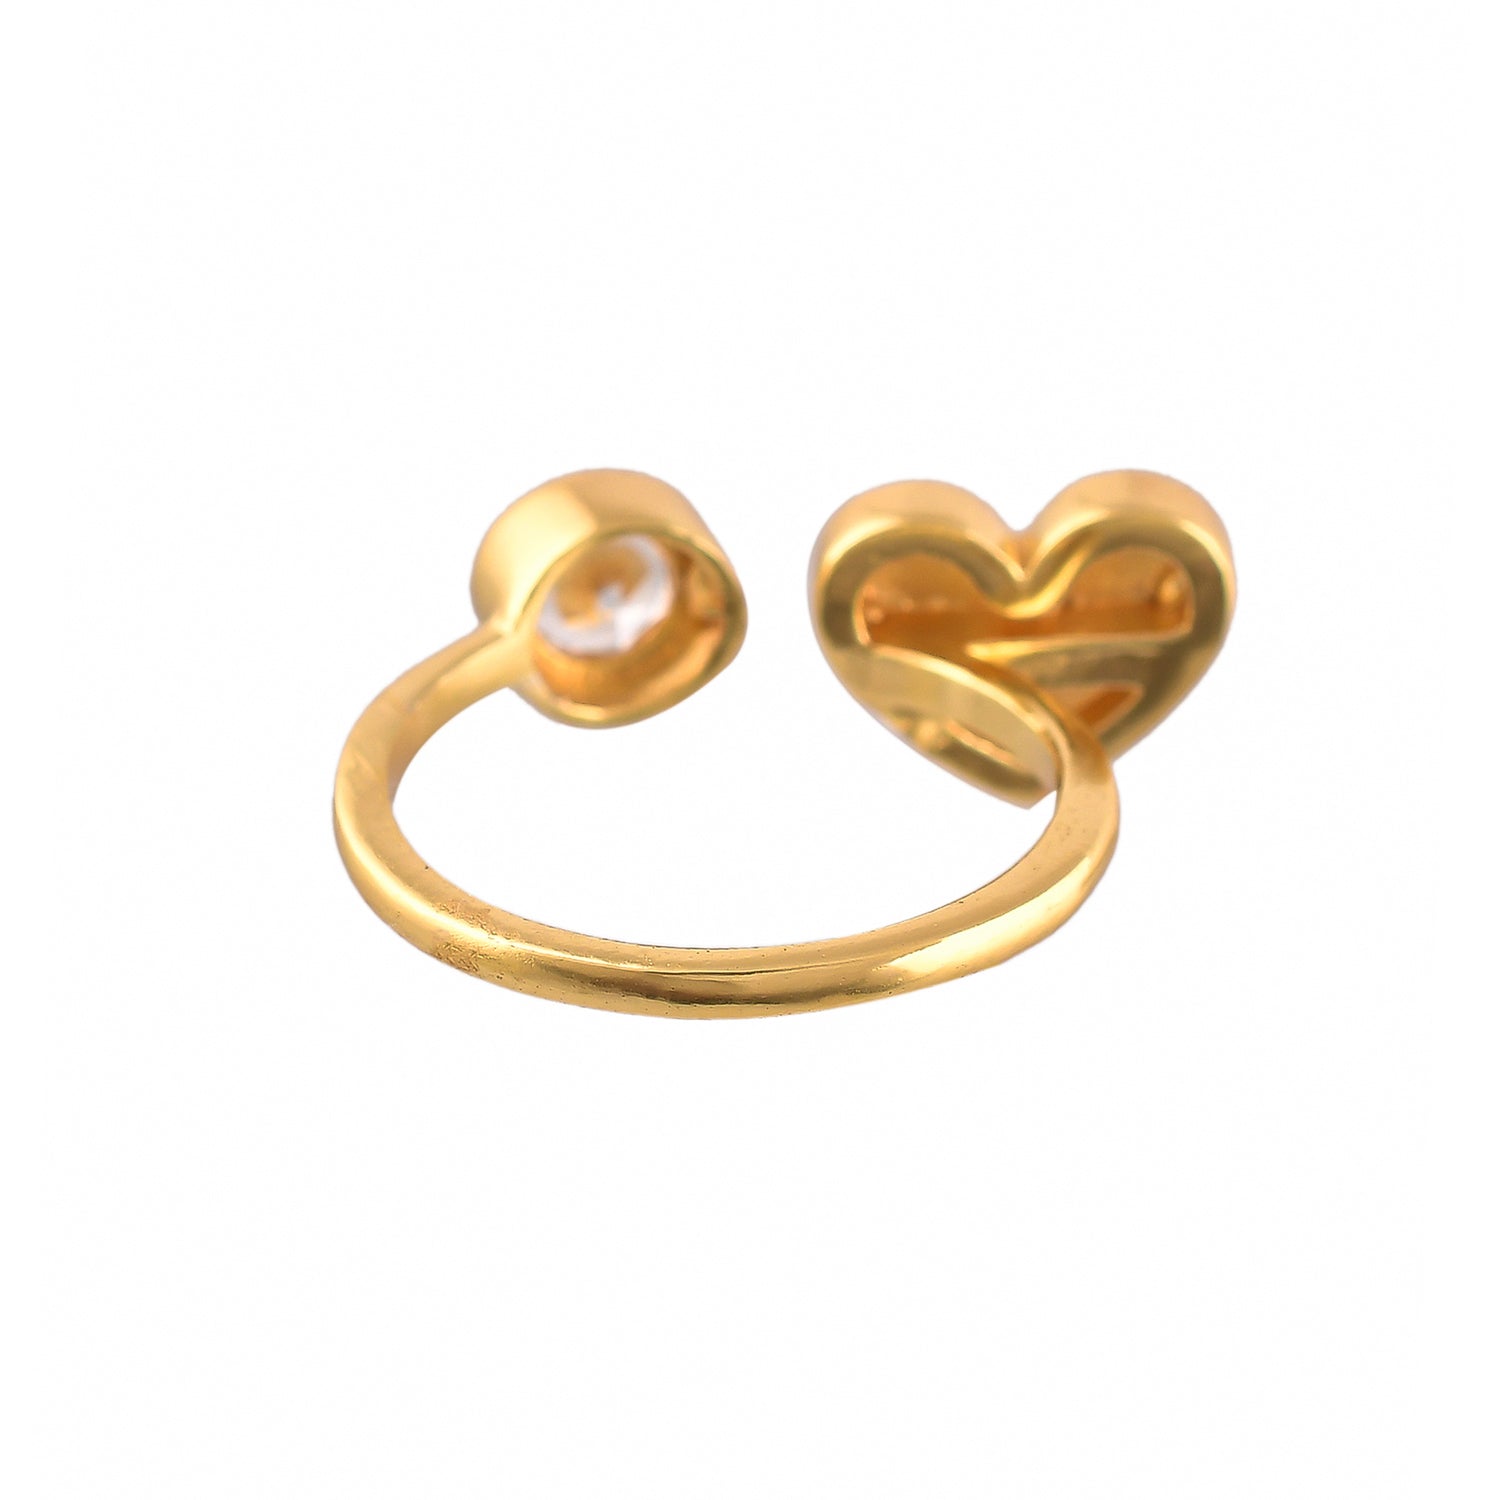 Valentine's Day Red Heart Open Finger Ring